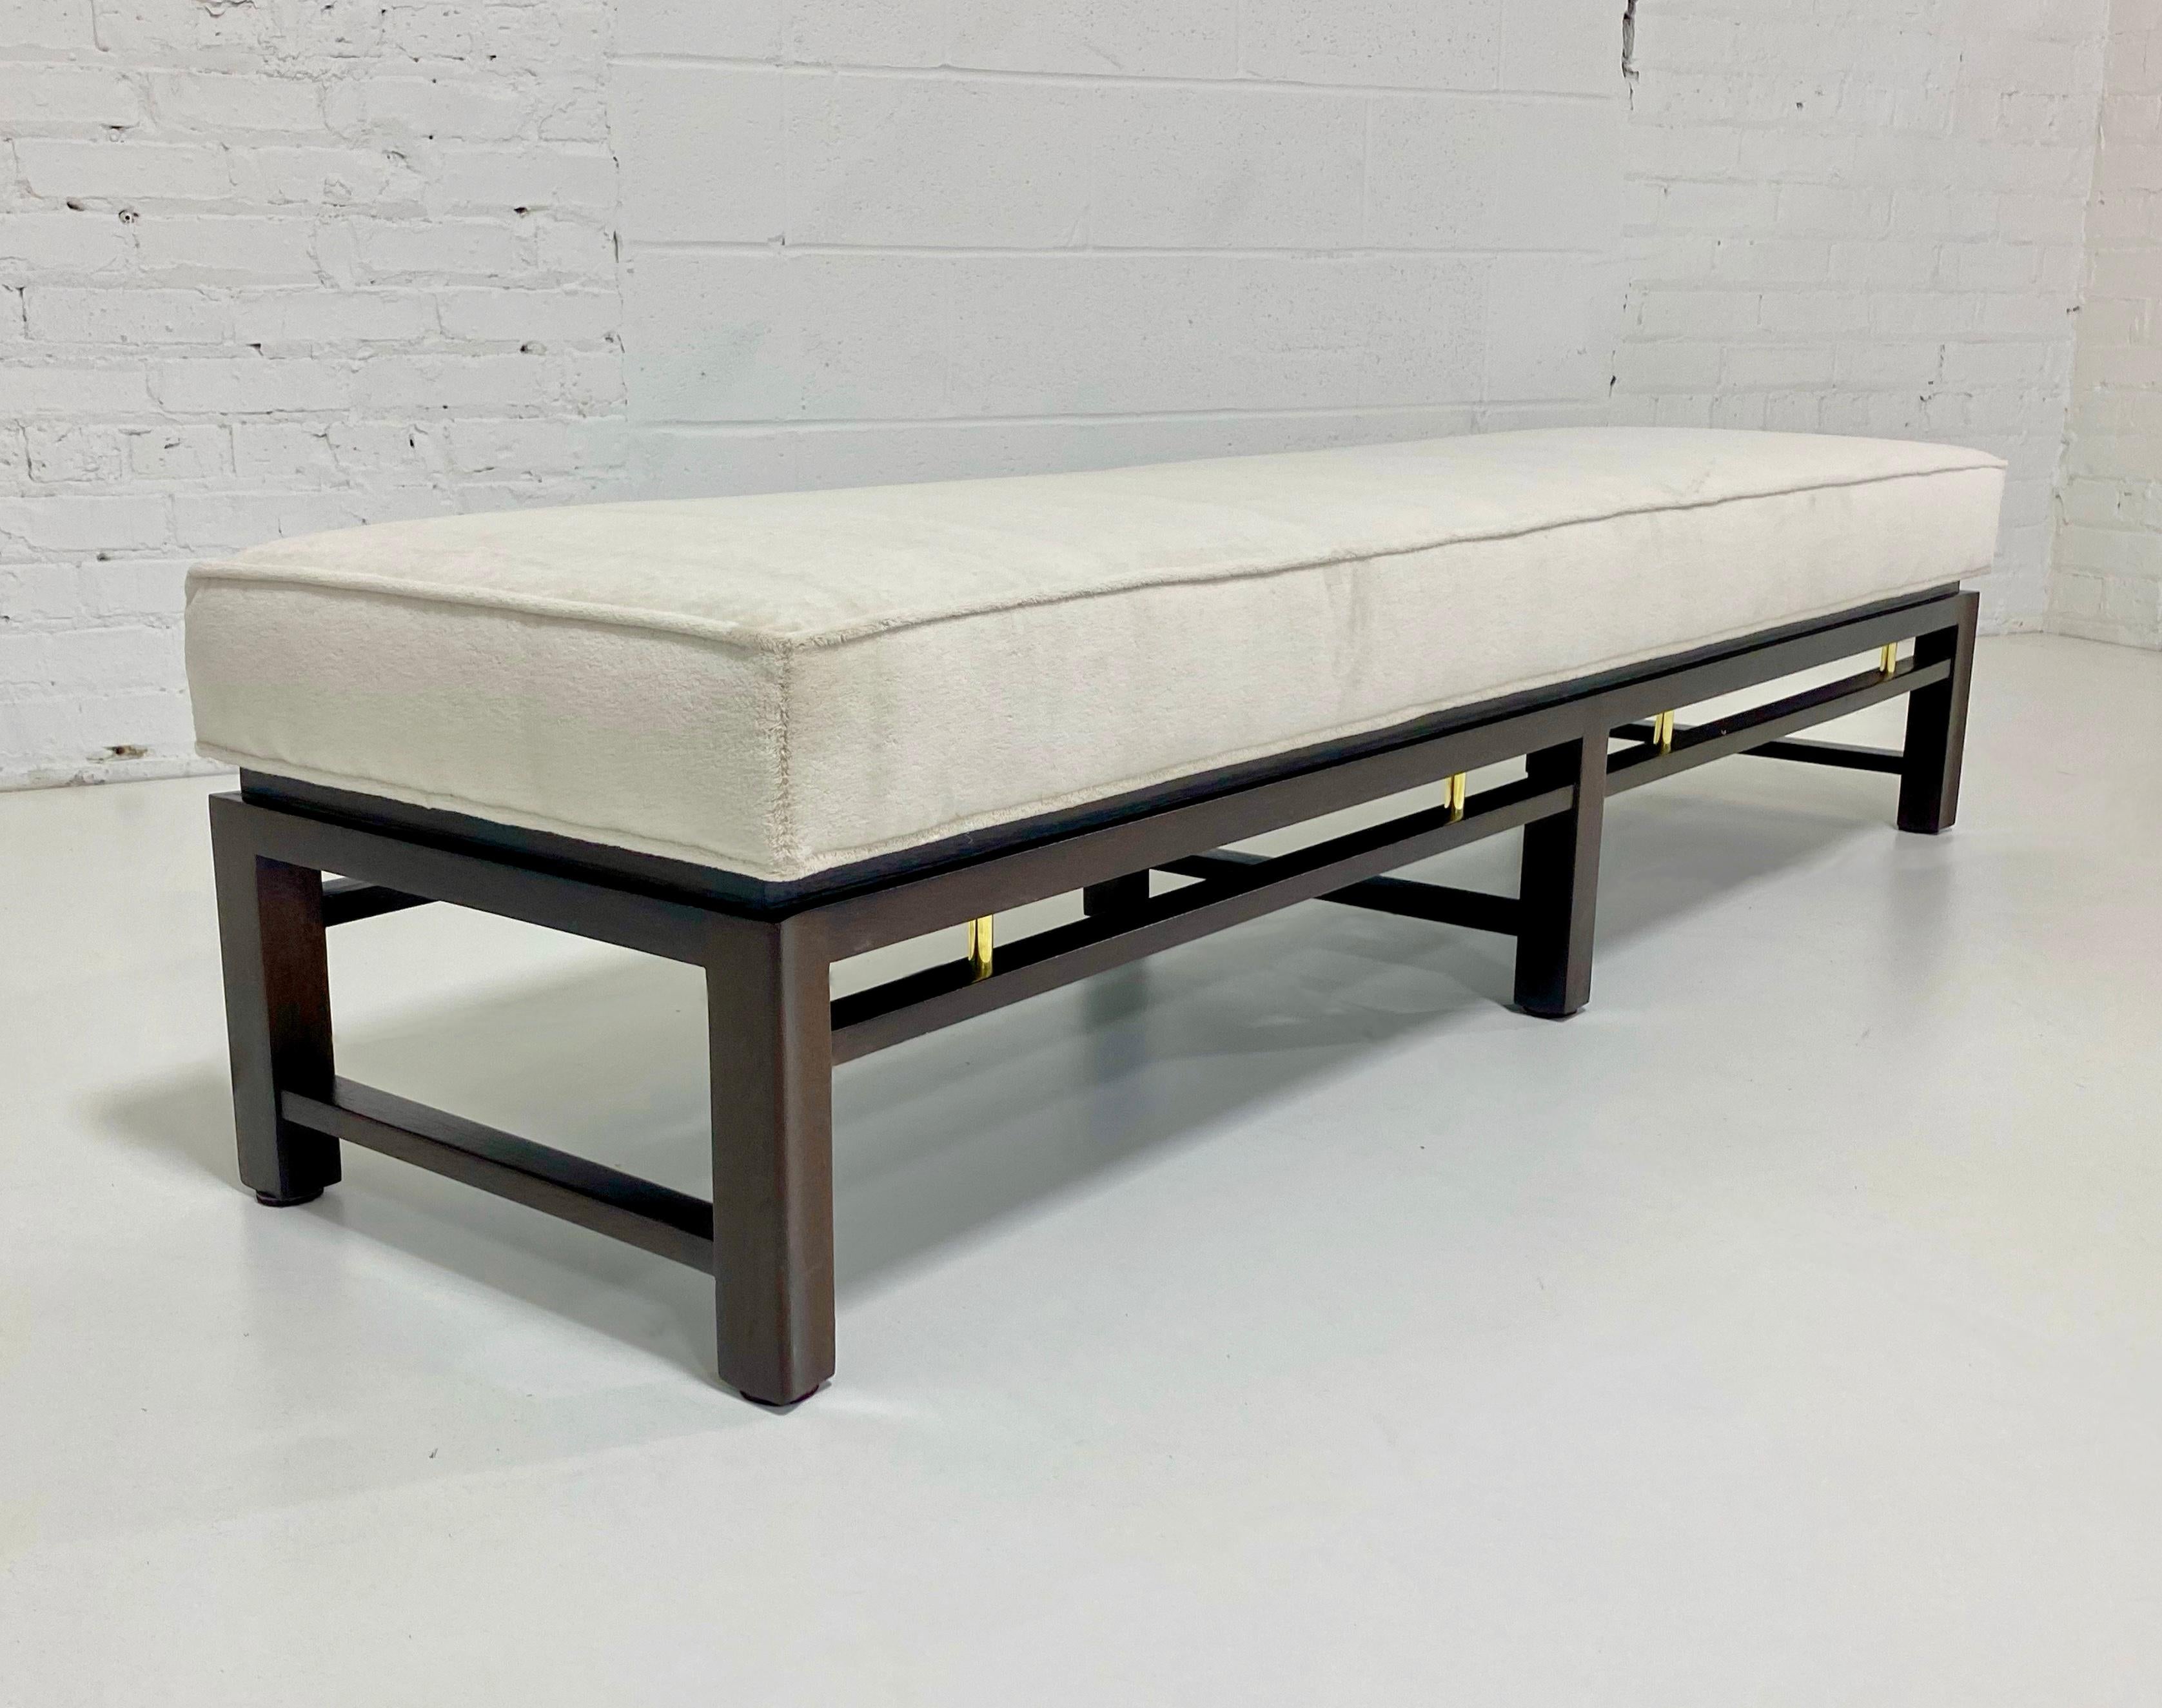 Bench by Edward Wormley for Dunbar. Espresso stained mahogany frame with brass details. Newly upholstered in creamy silk blend velvet. 
 